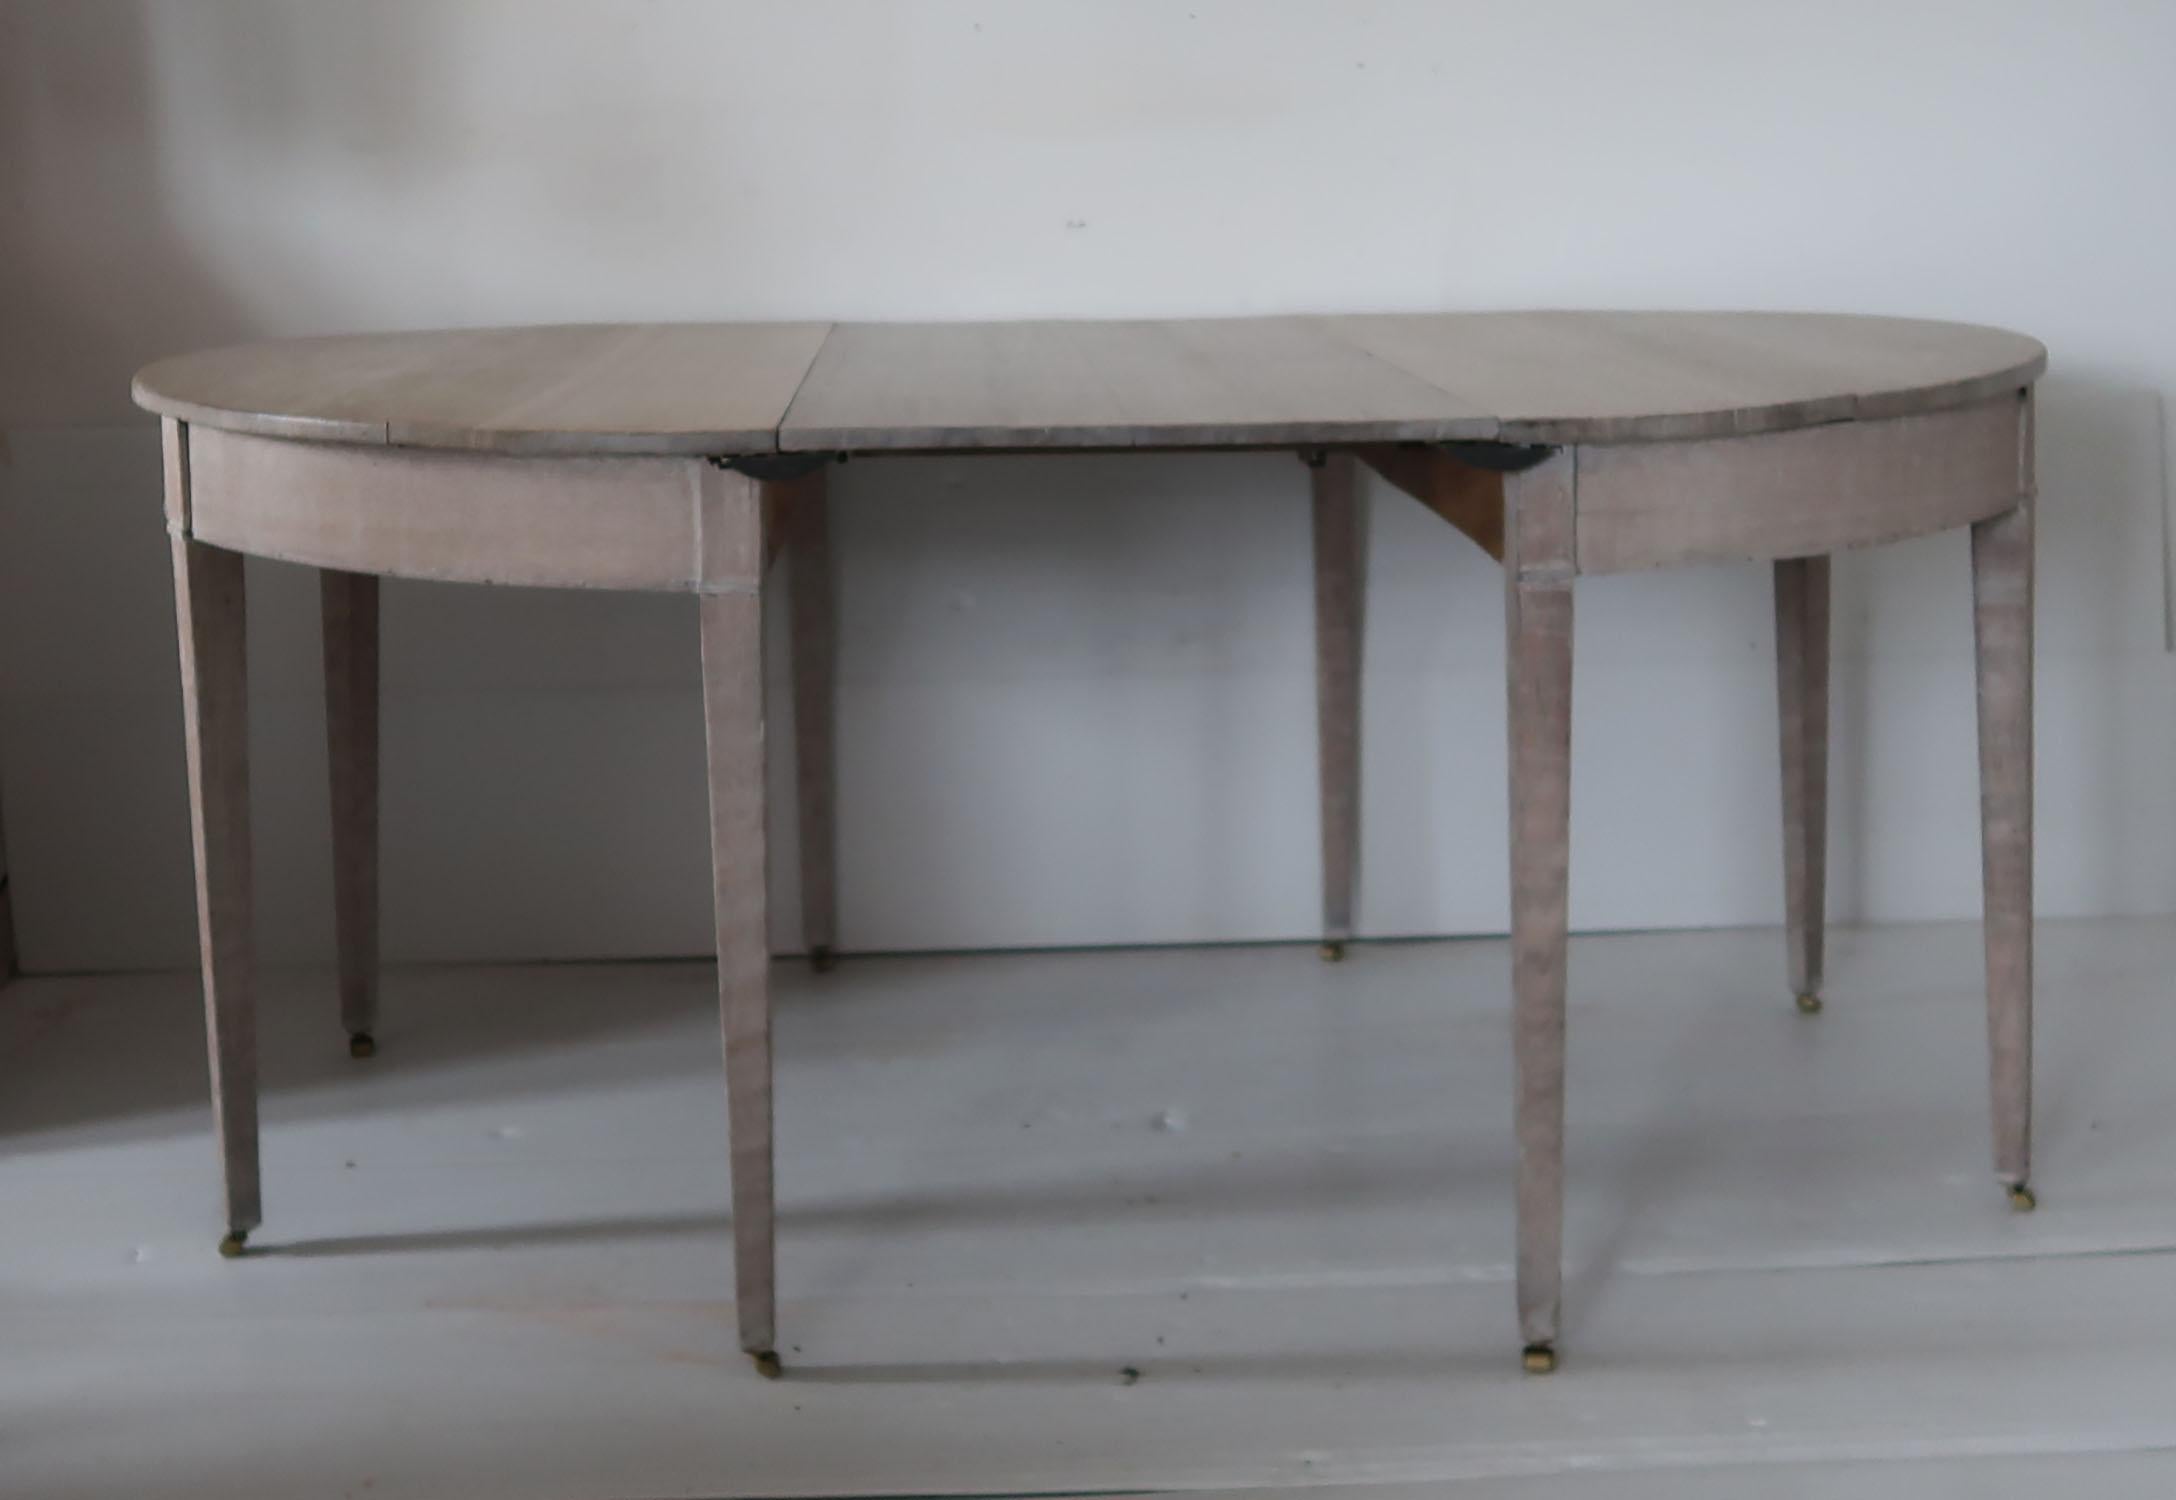 Fabulous Georgian dining table. Seats 8 people.

2 D ends and the original leaf.

The oak has been recently limed. There is a lacquer on the top to make it quite functional as a diner.

Very versatile. It can be the full 8-seat dining table, a